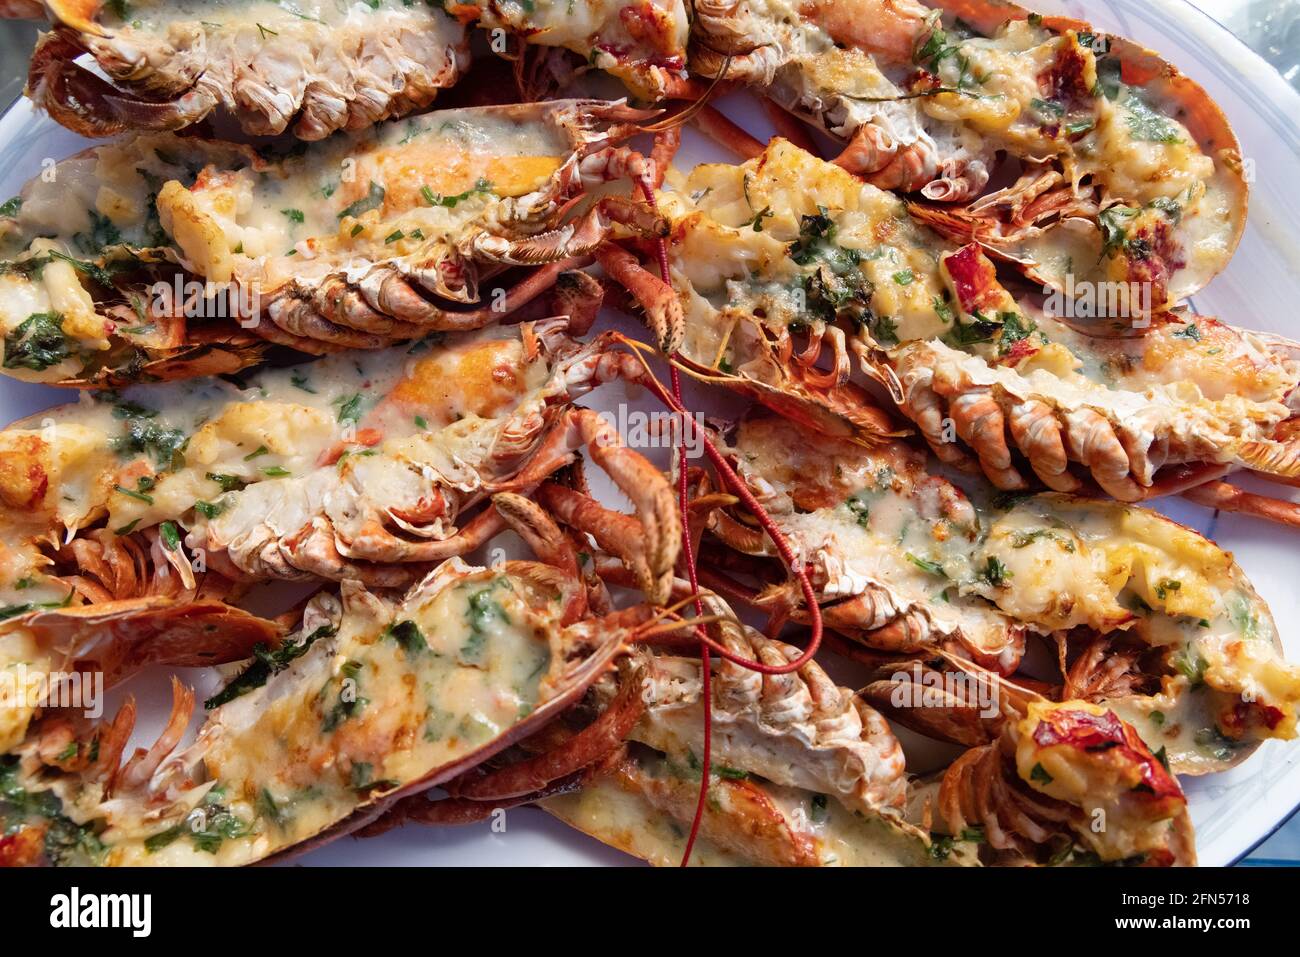 Lobster Thermidor; several lobsters served on a bone china plate with shallots, mustard, herbs and parmesan; UK Stock Photo